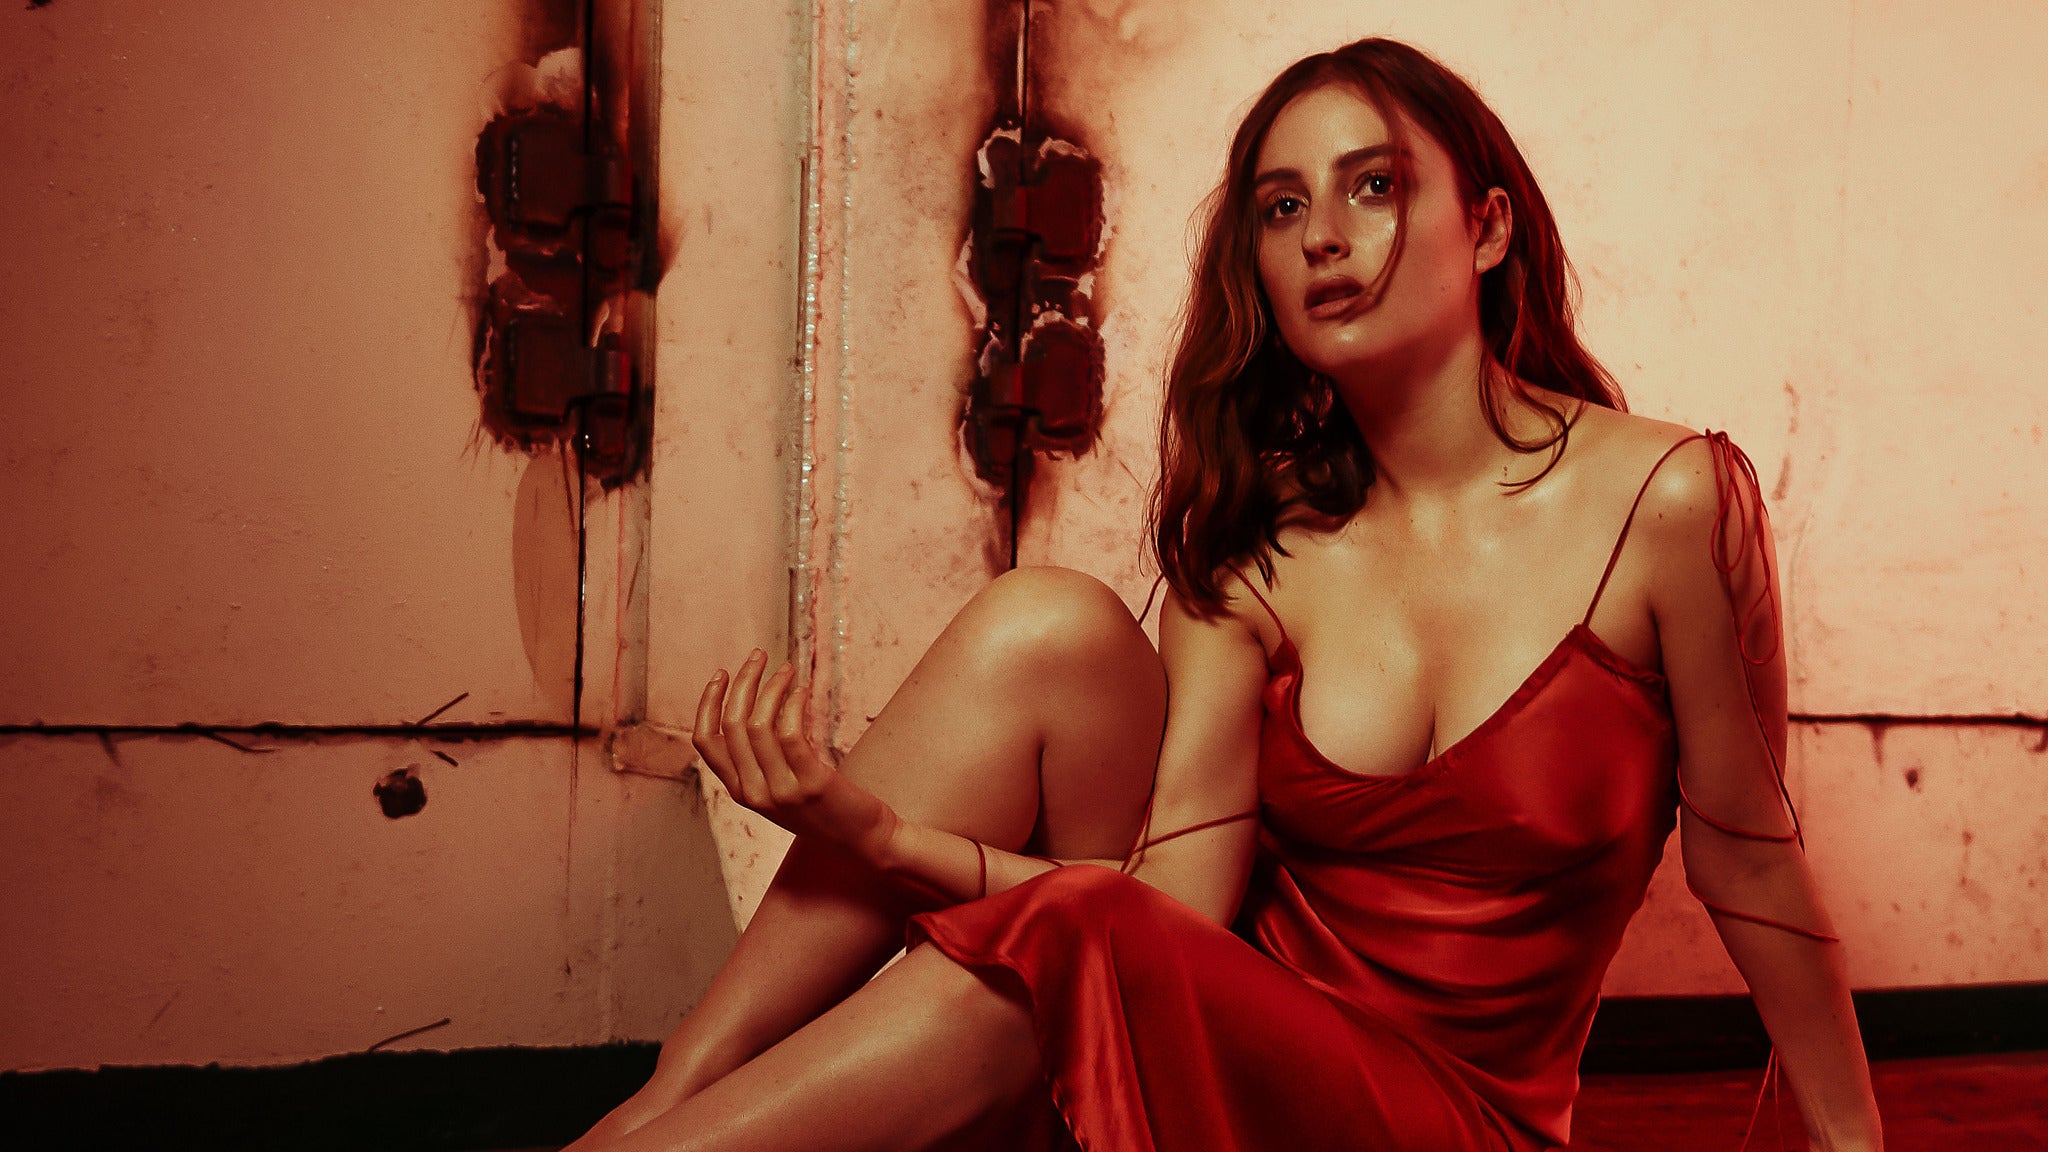 BANKS - The III Tour in Houston promo photo for VIP Package presale offer code